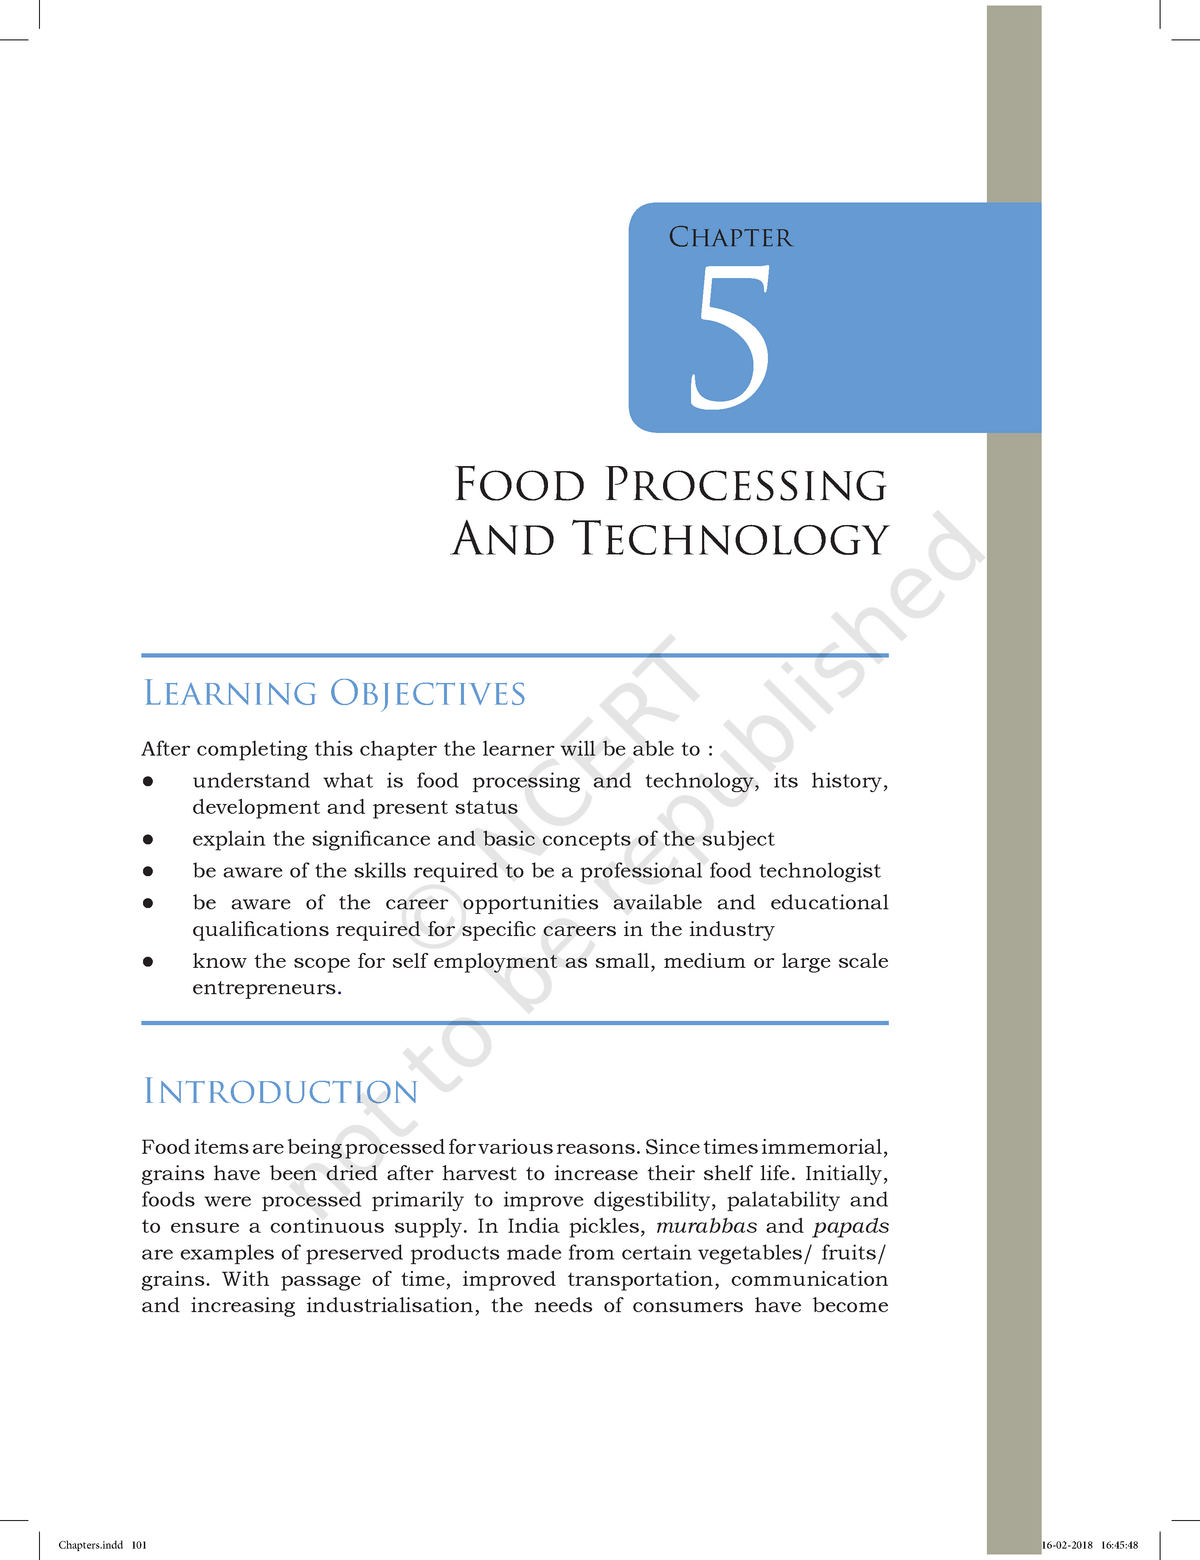 thesis food technology